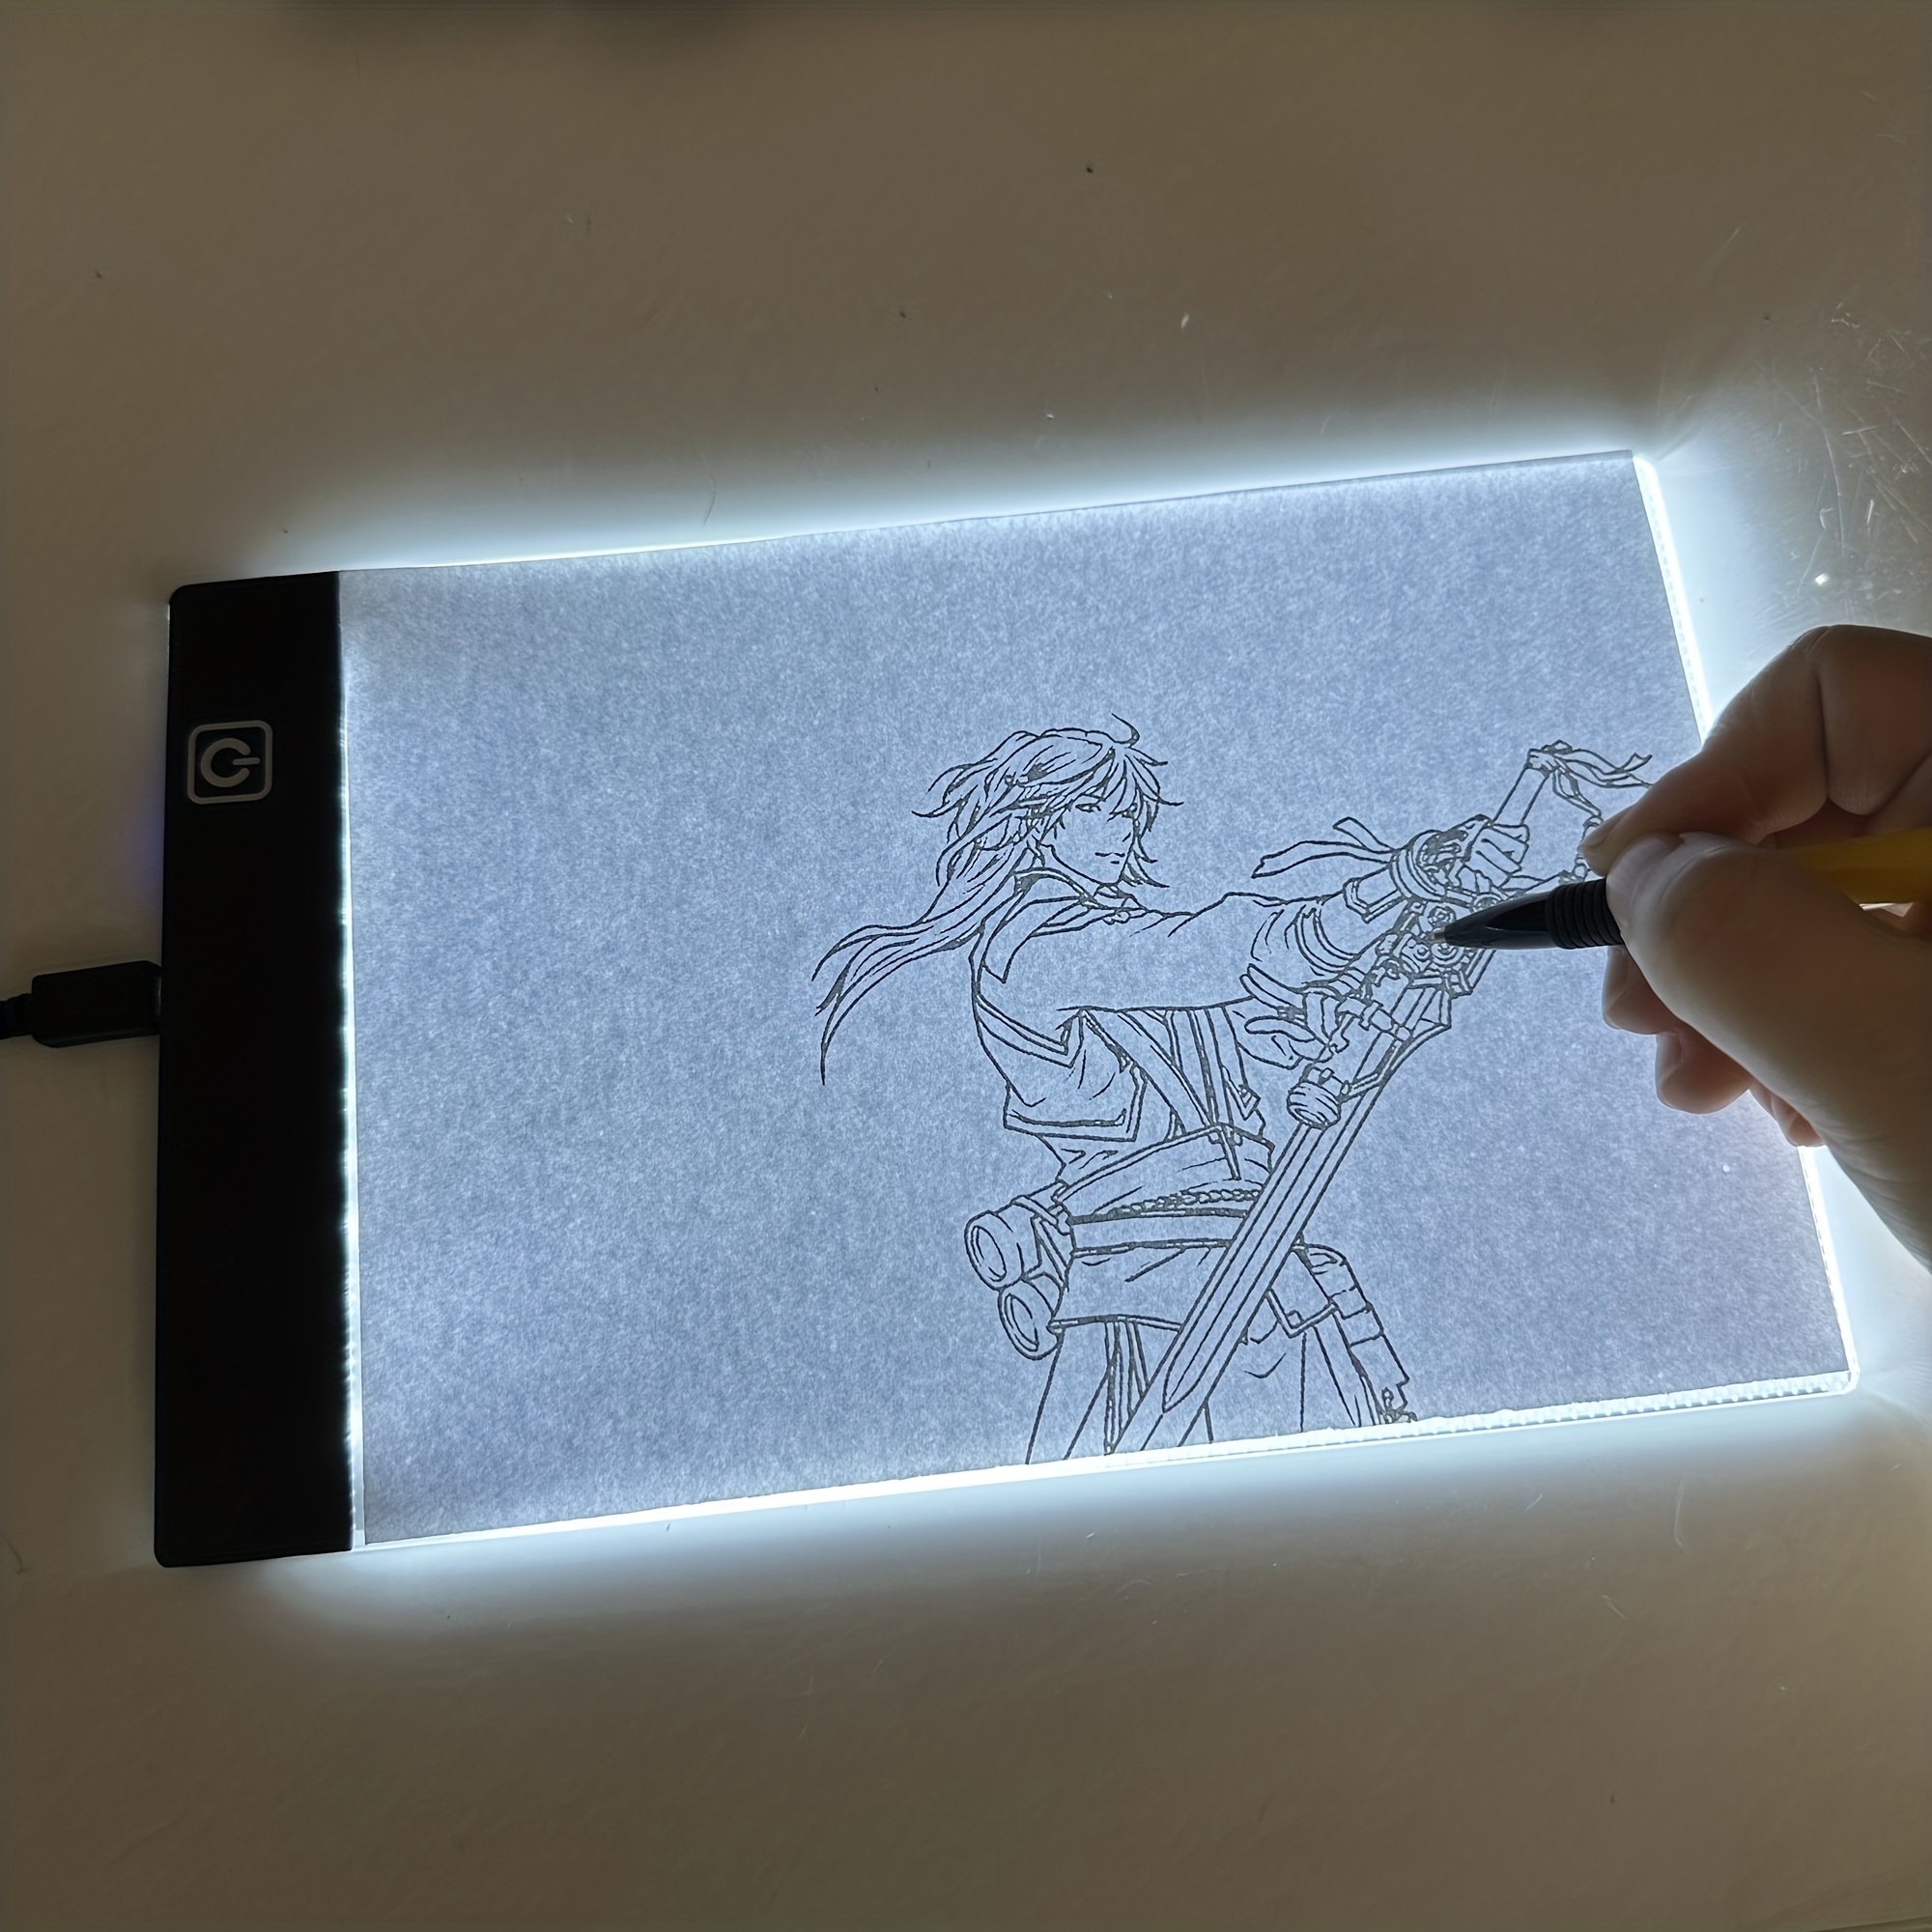 LED Drawing Copy Board Kids Toy 3 Level Dimmable Painting Tablet Night  Light Note Pad Children Learning Educational Tool Halloween,Thanksgiving  And Christmas Gift